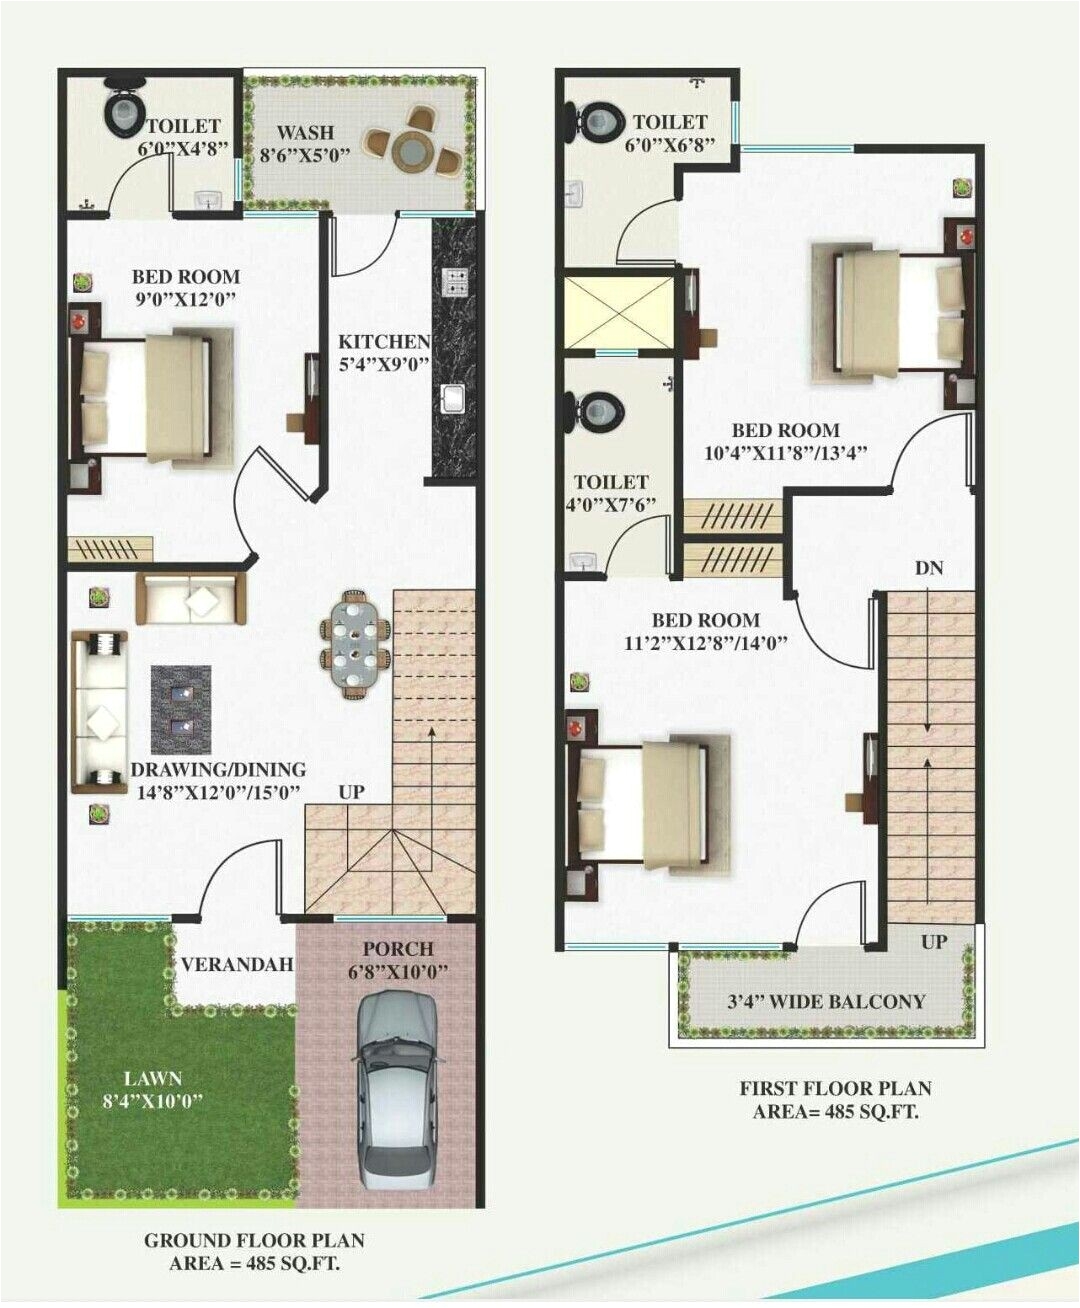 20 x 40 house plans awesome 15 x 40 working plans pinterest of 20 x 40